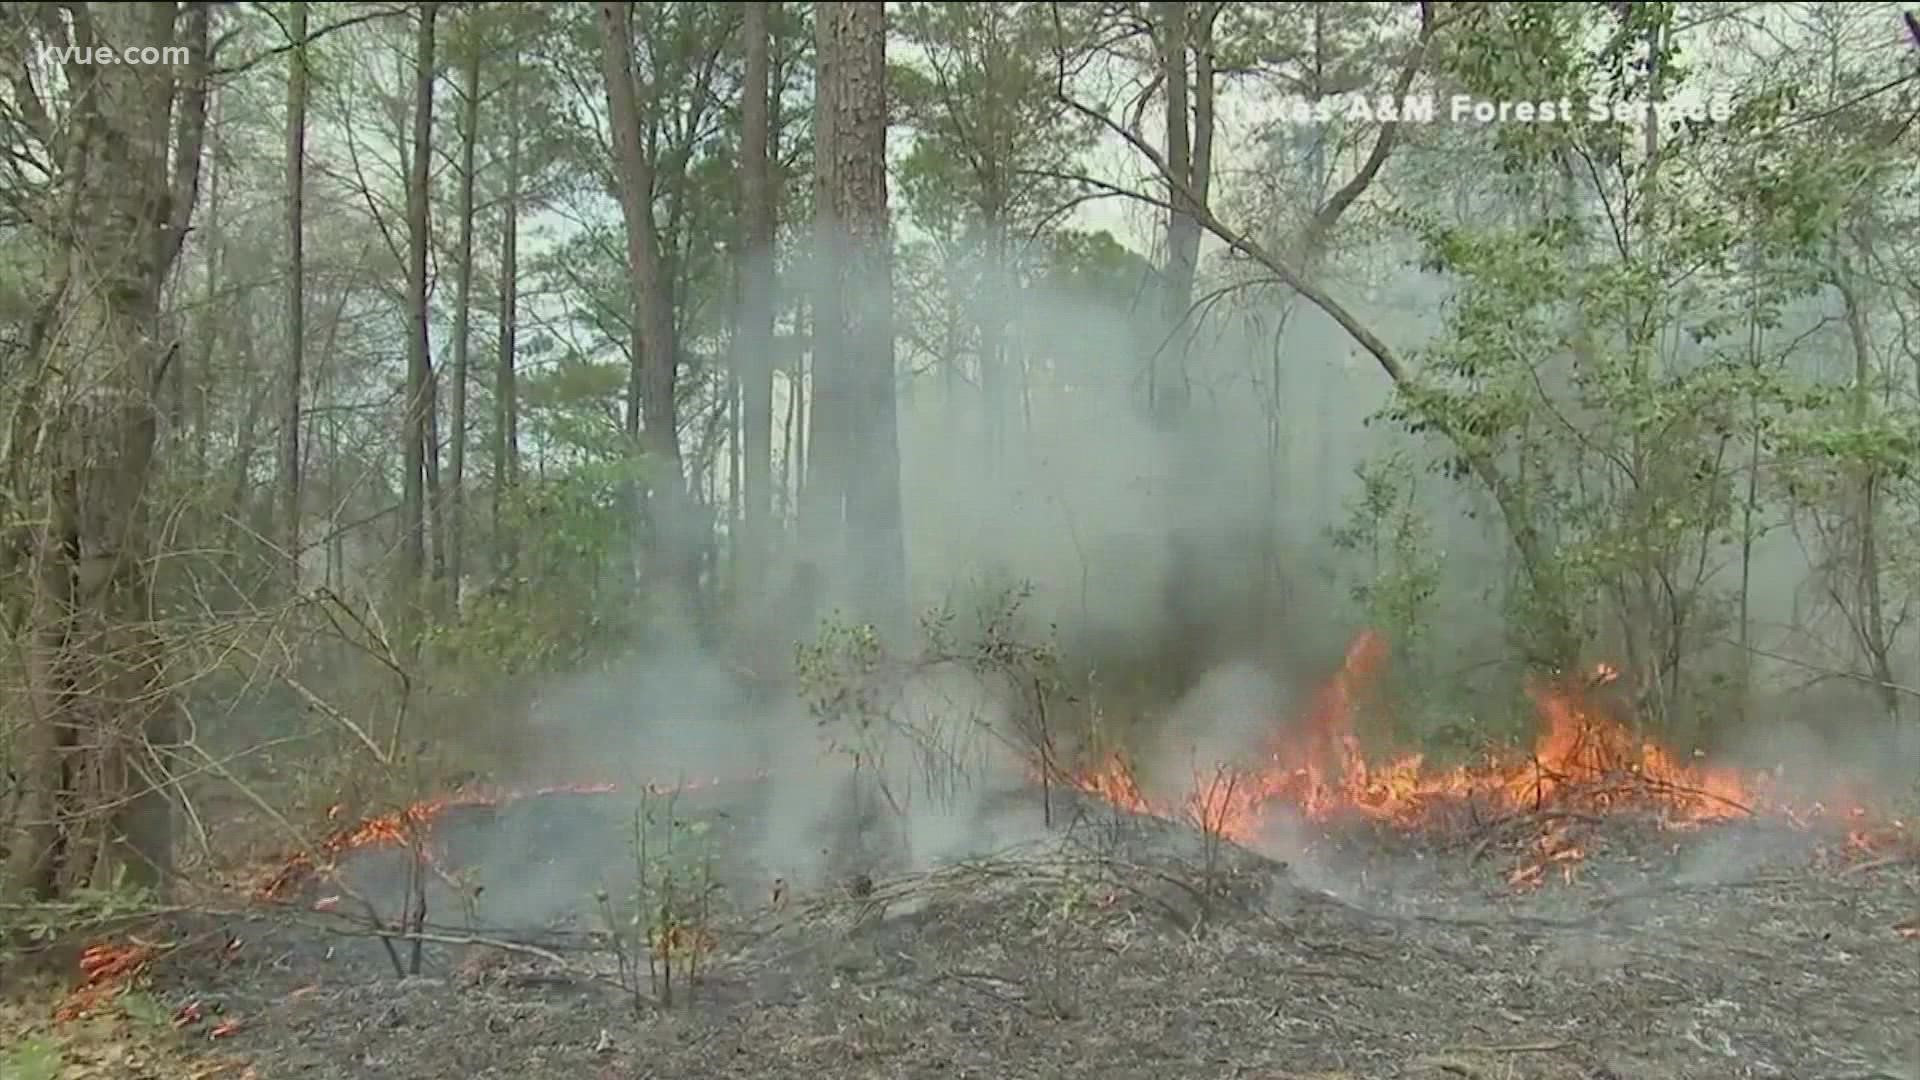 Here's a look at common reasons controlled burns sometimes get out of control after a wildfire burned through 800 acres in Bastrop County.